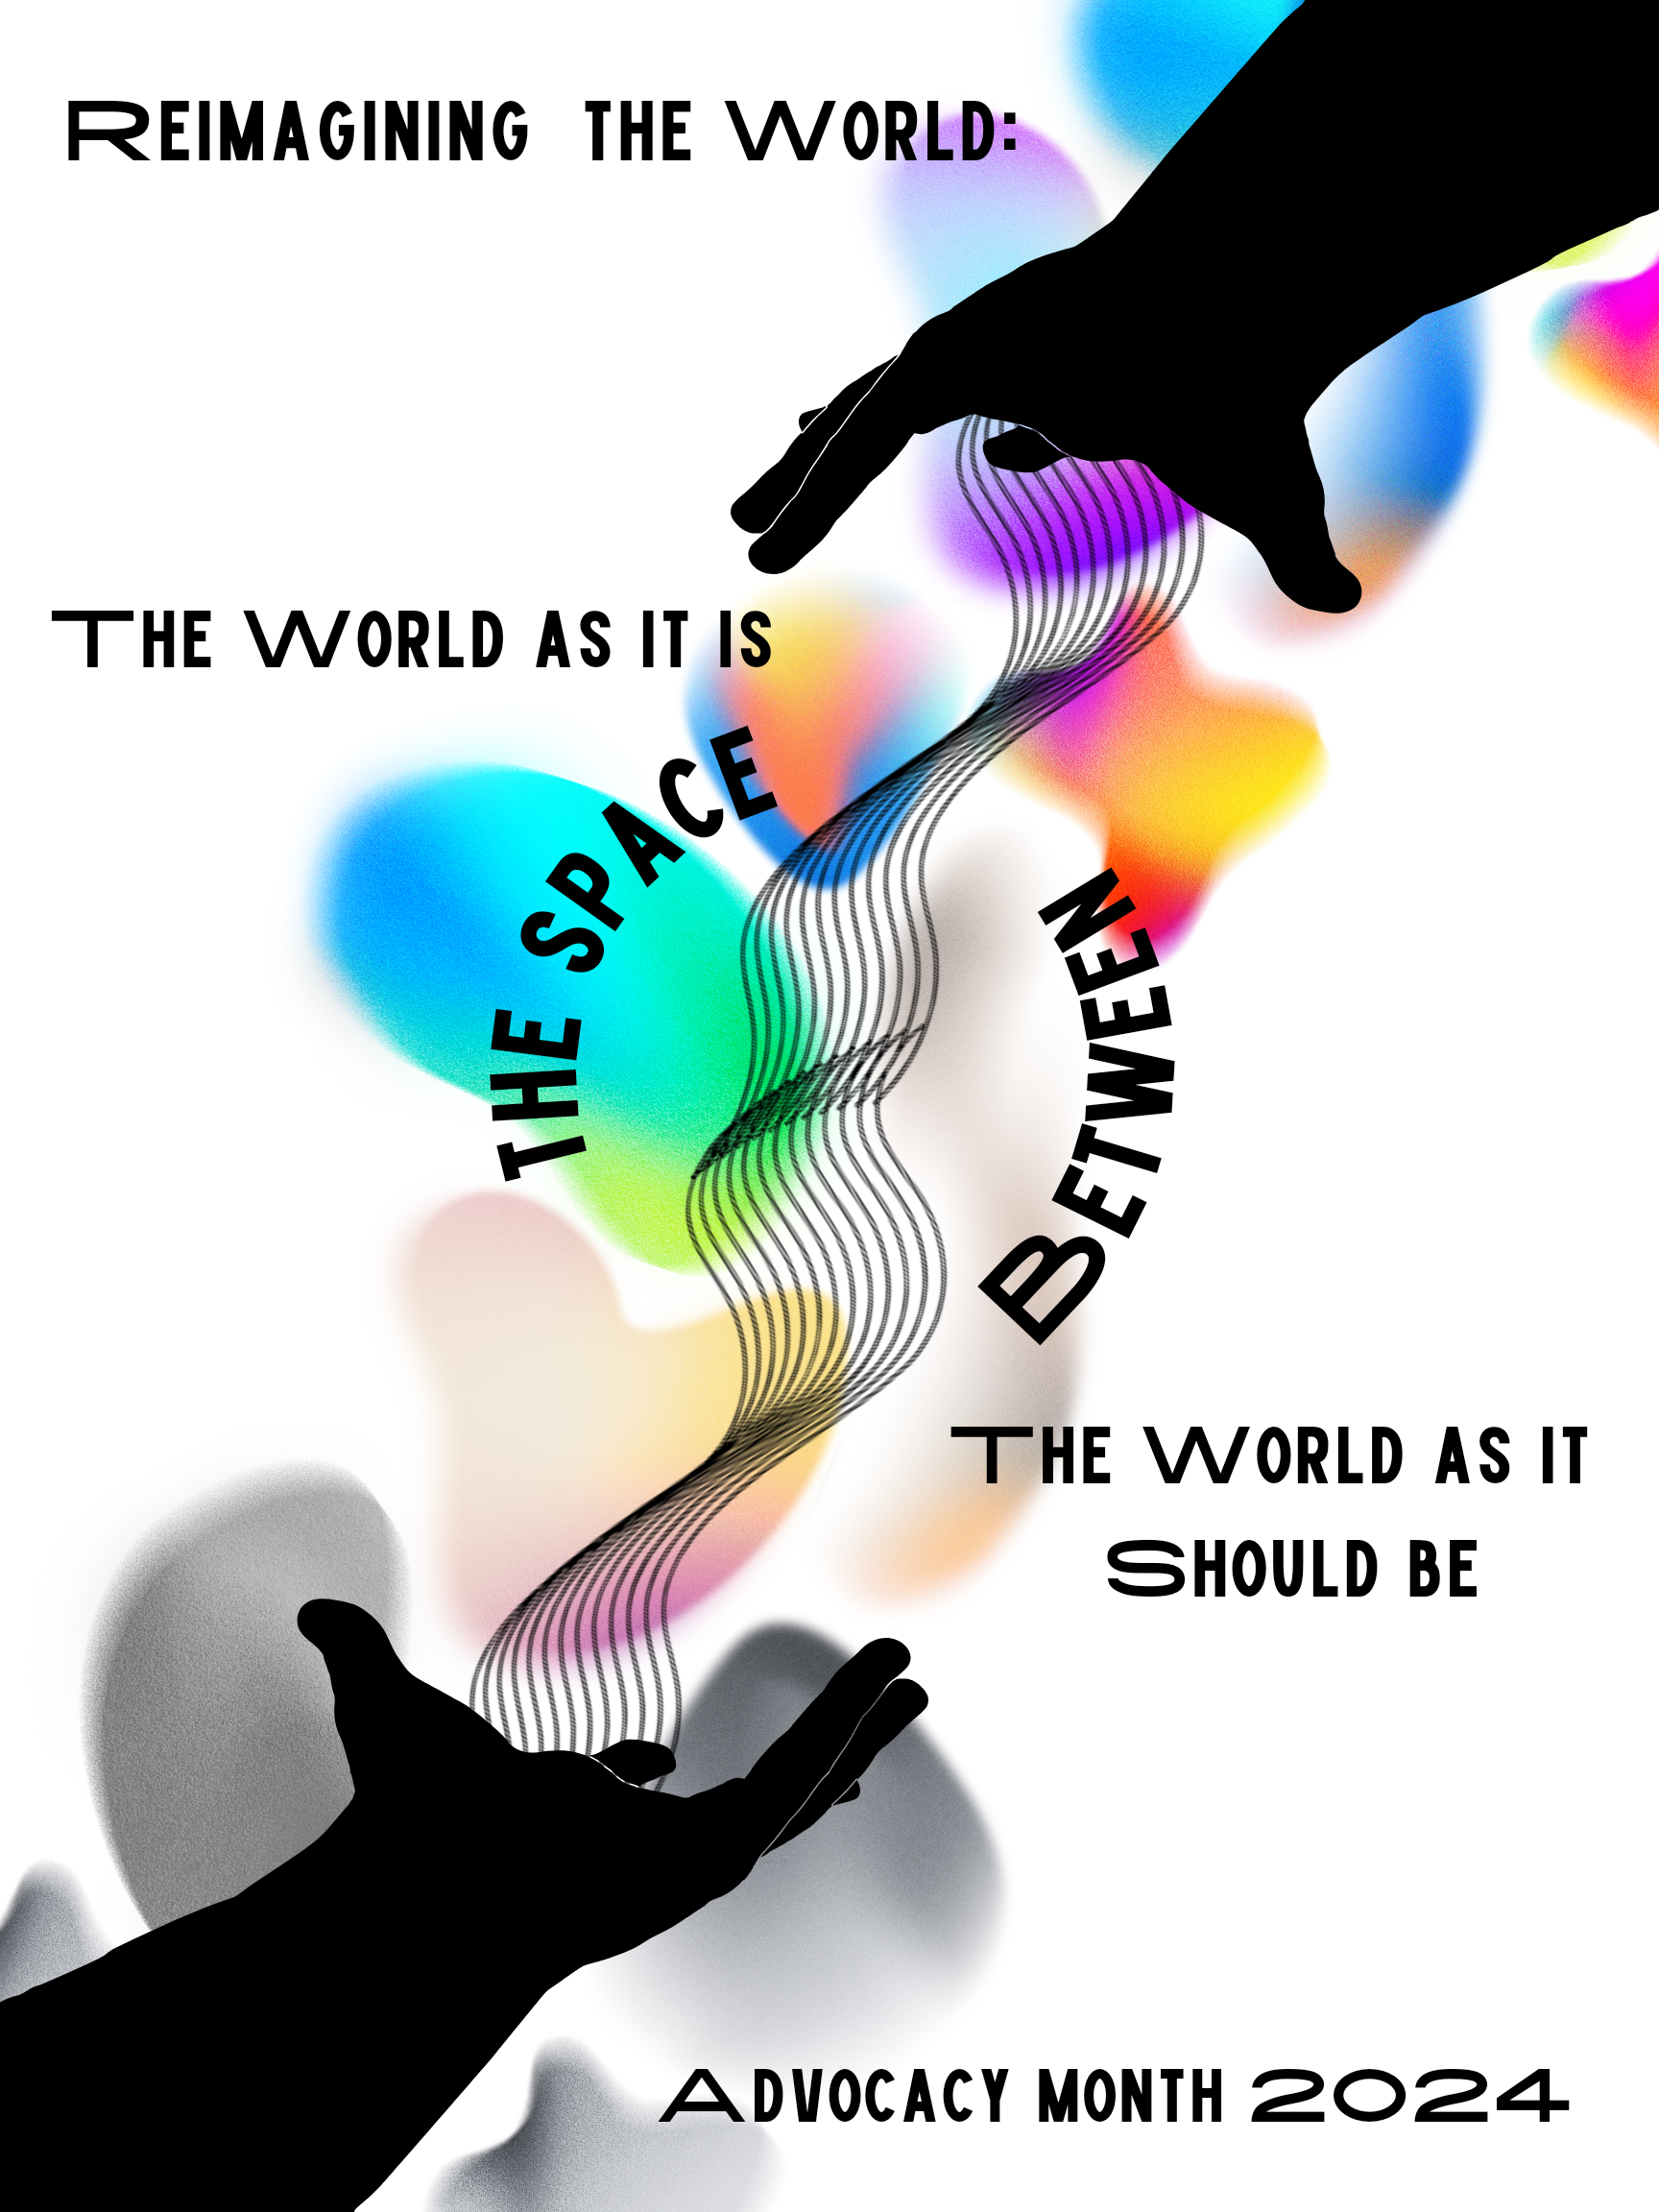 Reimagining the World: The world as it is, the world as it should be. There are…